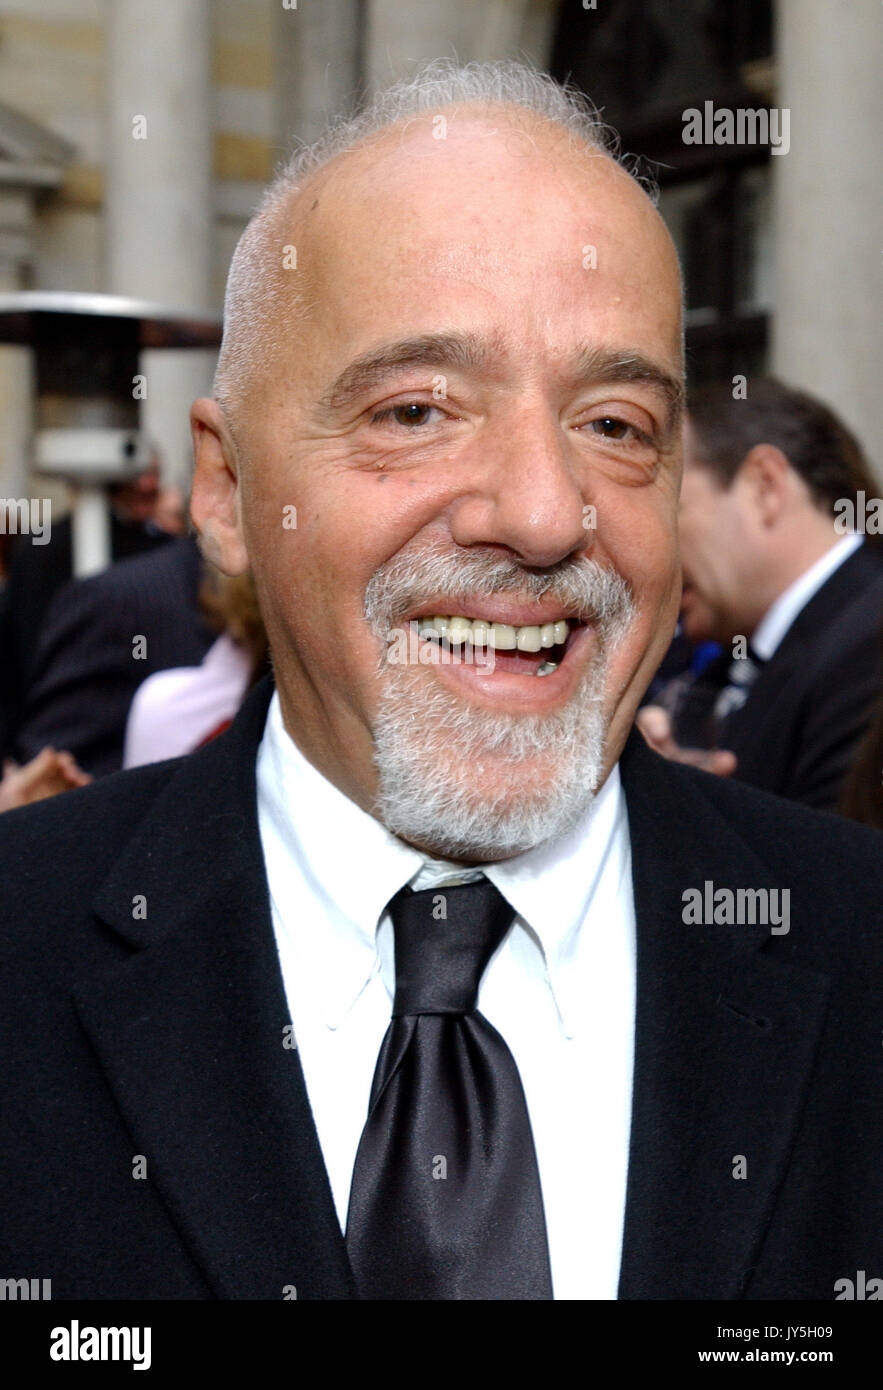 (dpa) - Brazilian author Paulo Coelho smiles as he arrives for the award ceremony at the chamber of commerce in Hamburg, Germany, 19 May 2005. Coelho received the 'Goldene Feder' (golden feather) media prize in the category 'honourary prize', which is being awarded by the Heinrich-Bauer publishing house. | usage worldwide Stock Photo